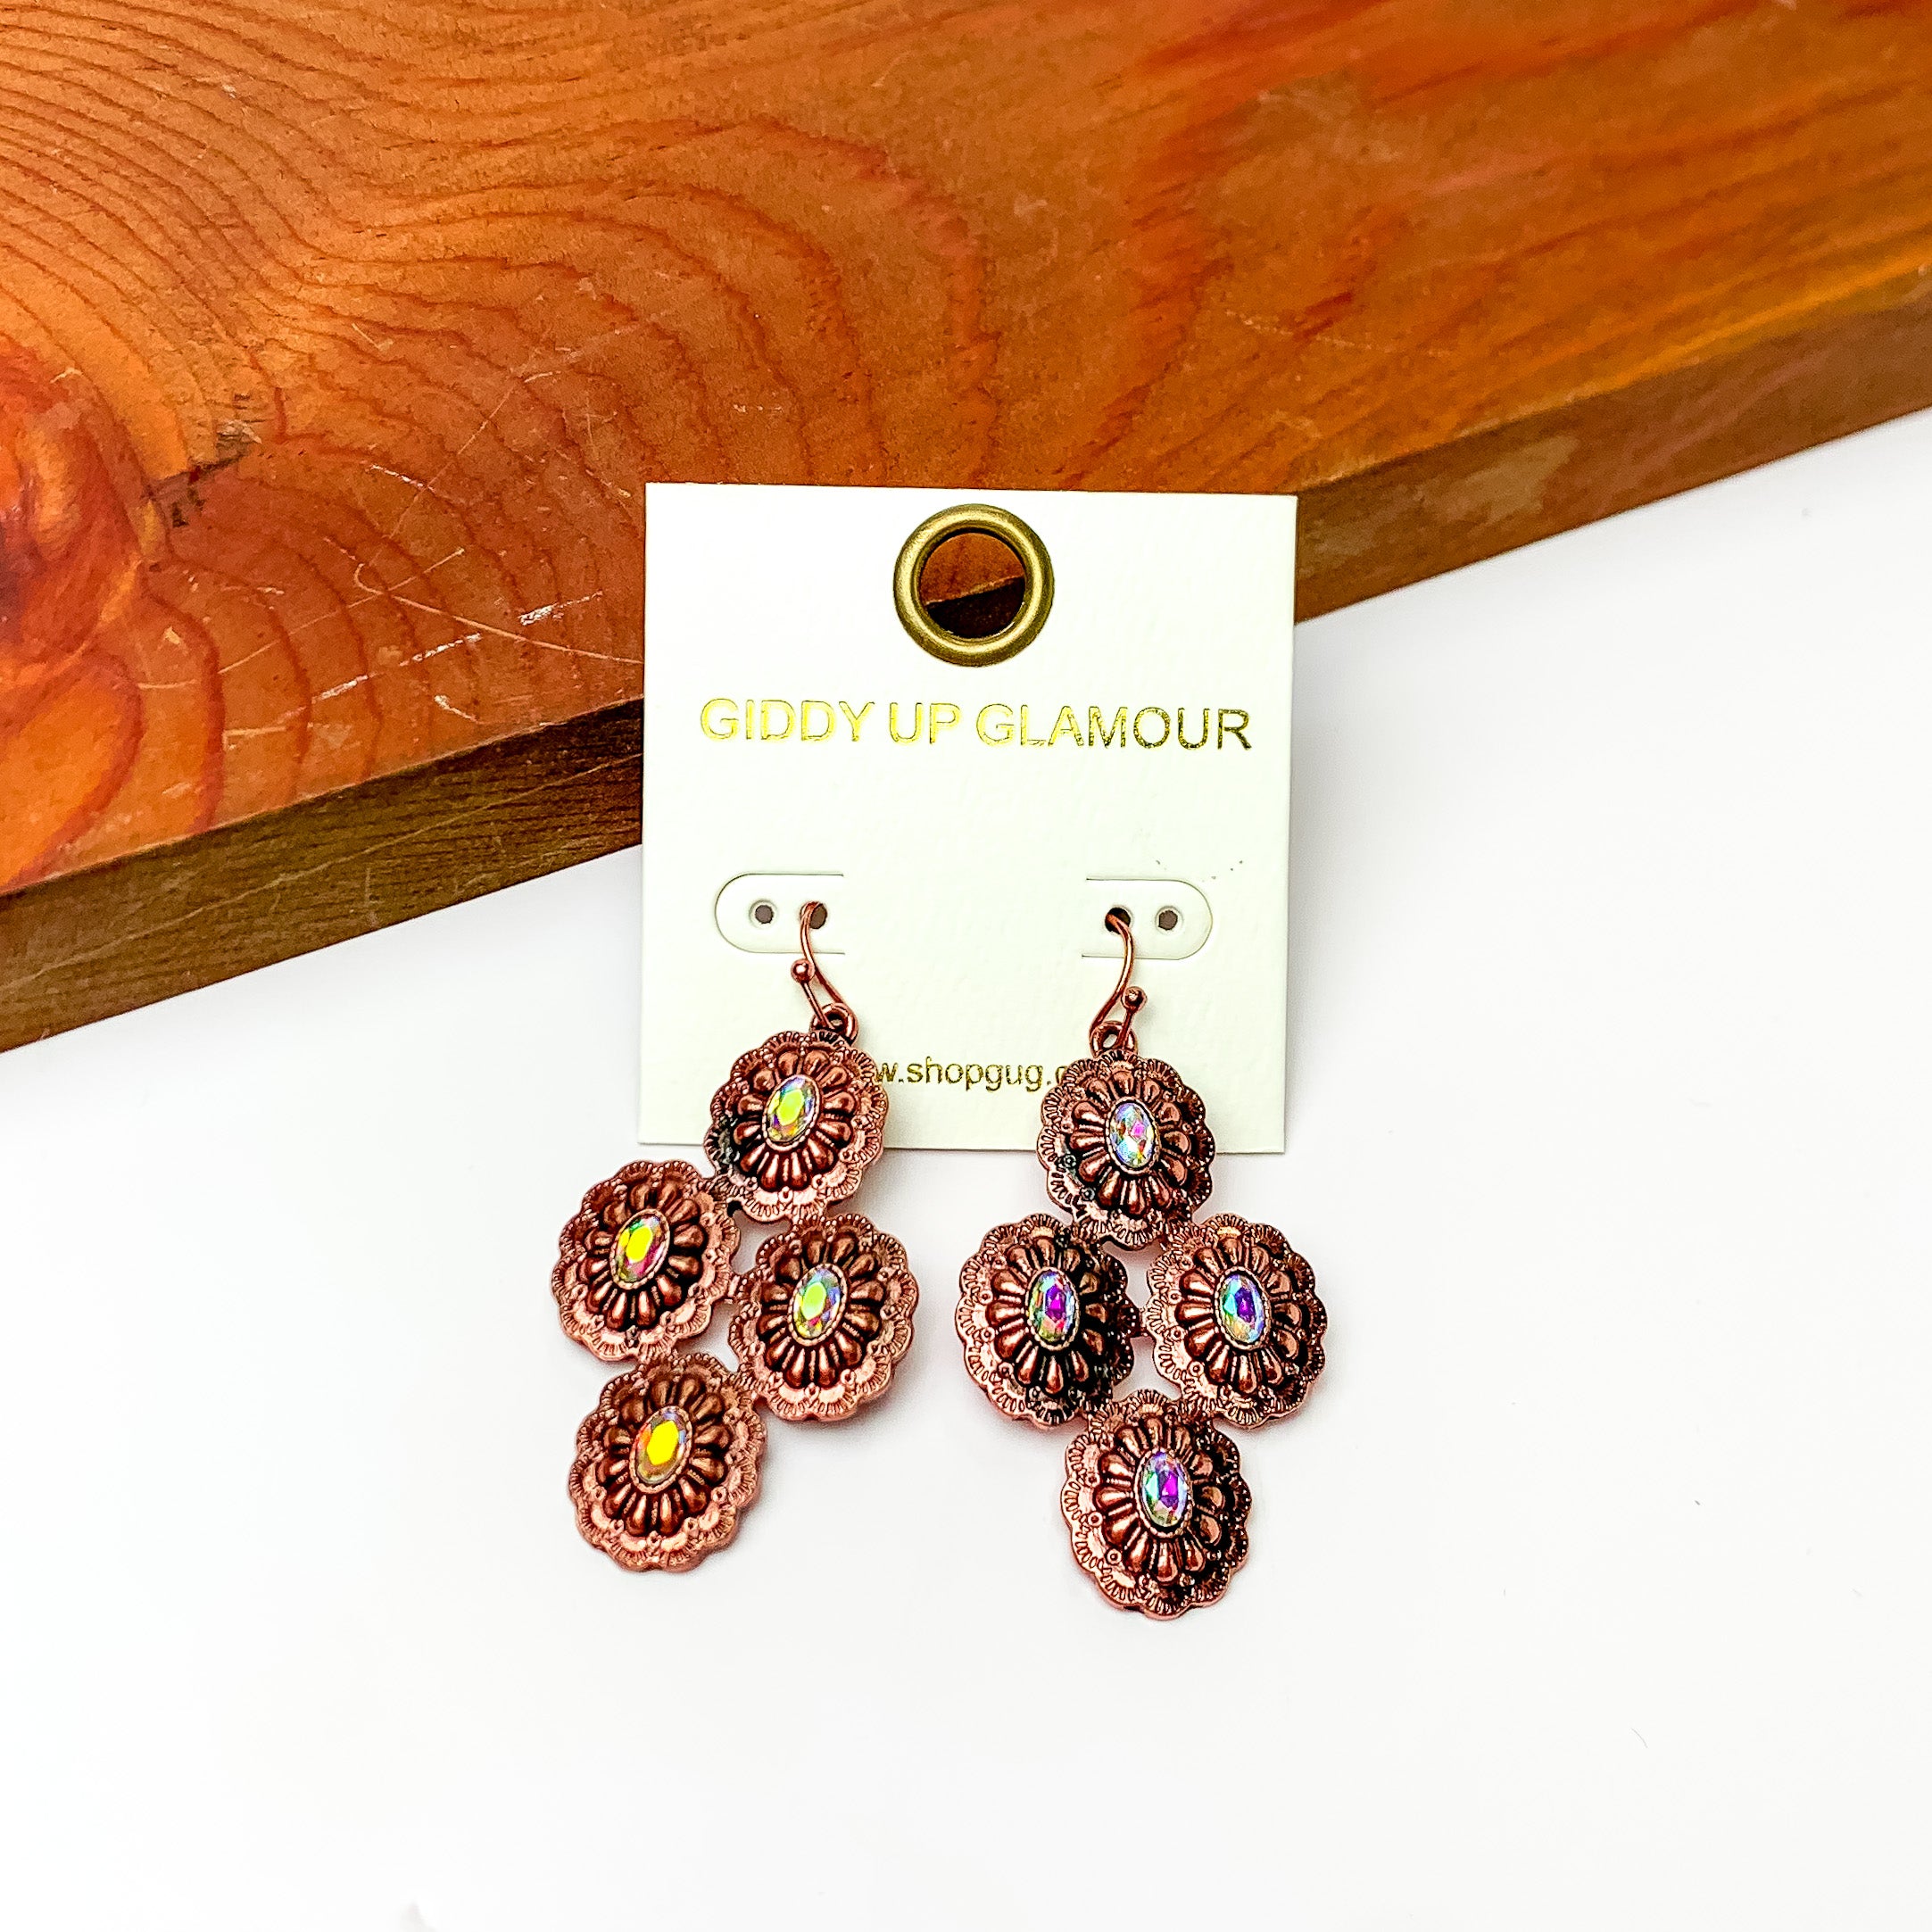 Copper tone flower design drop earrings with ab crystals. Pictured on a white background with a wood piece at the top.